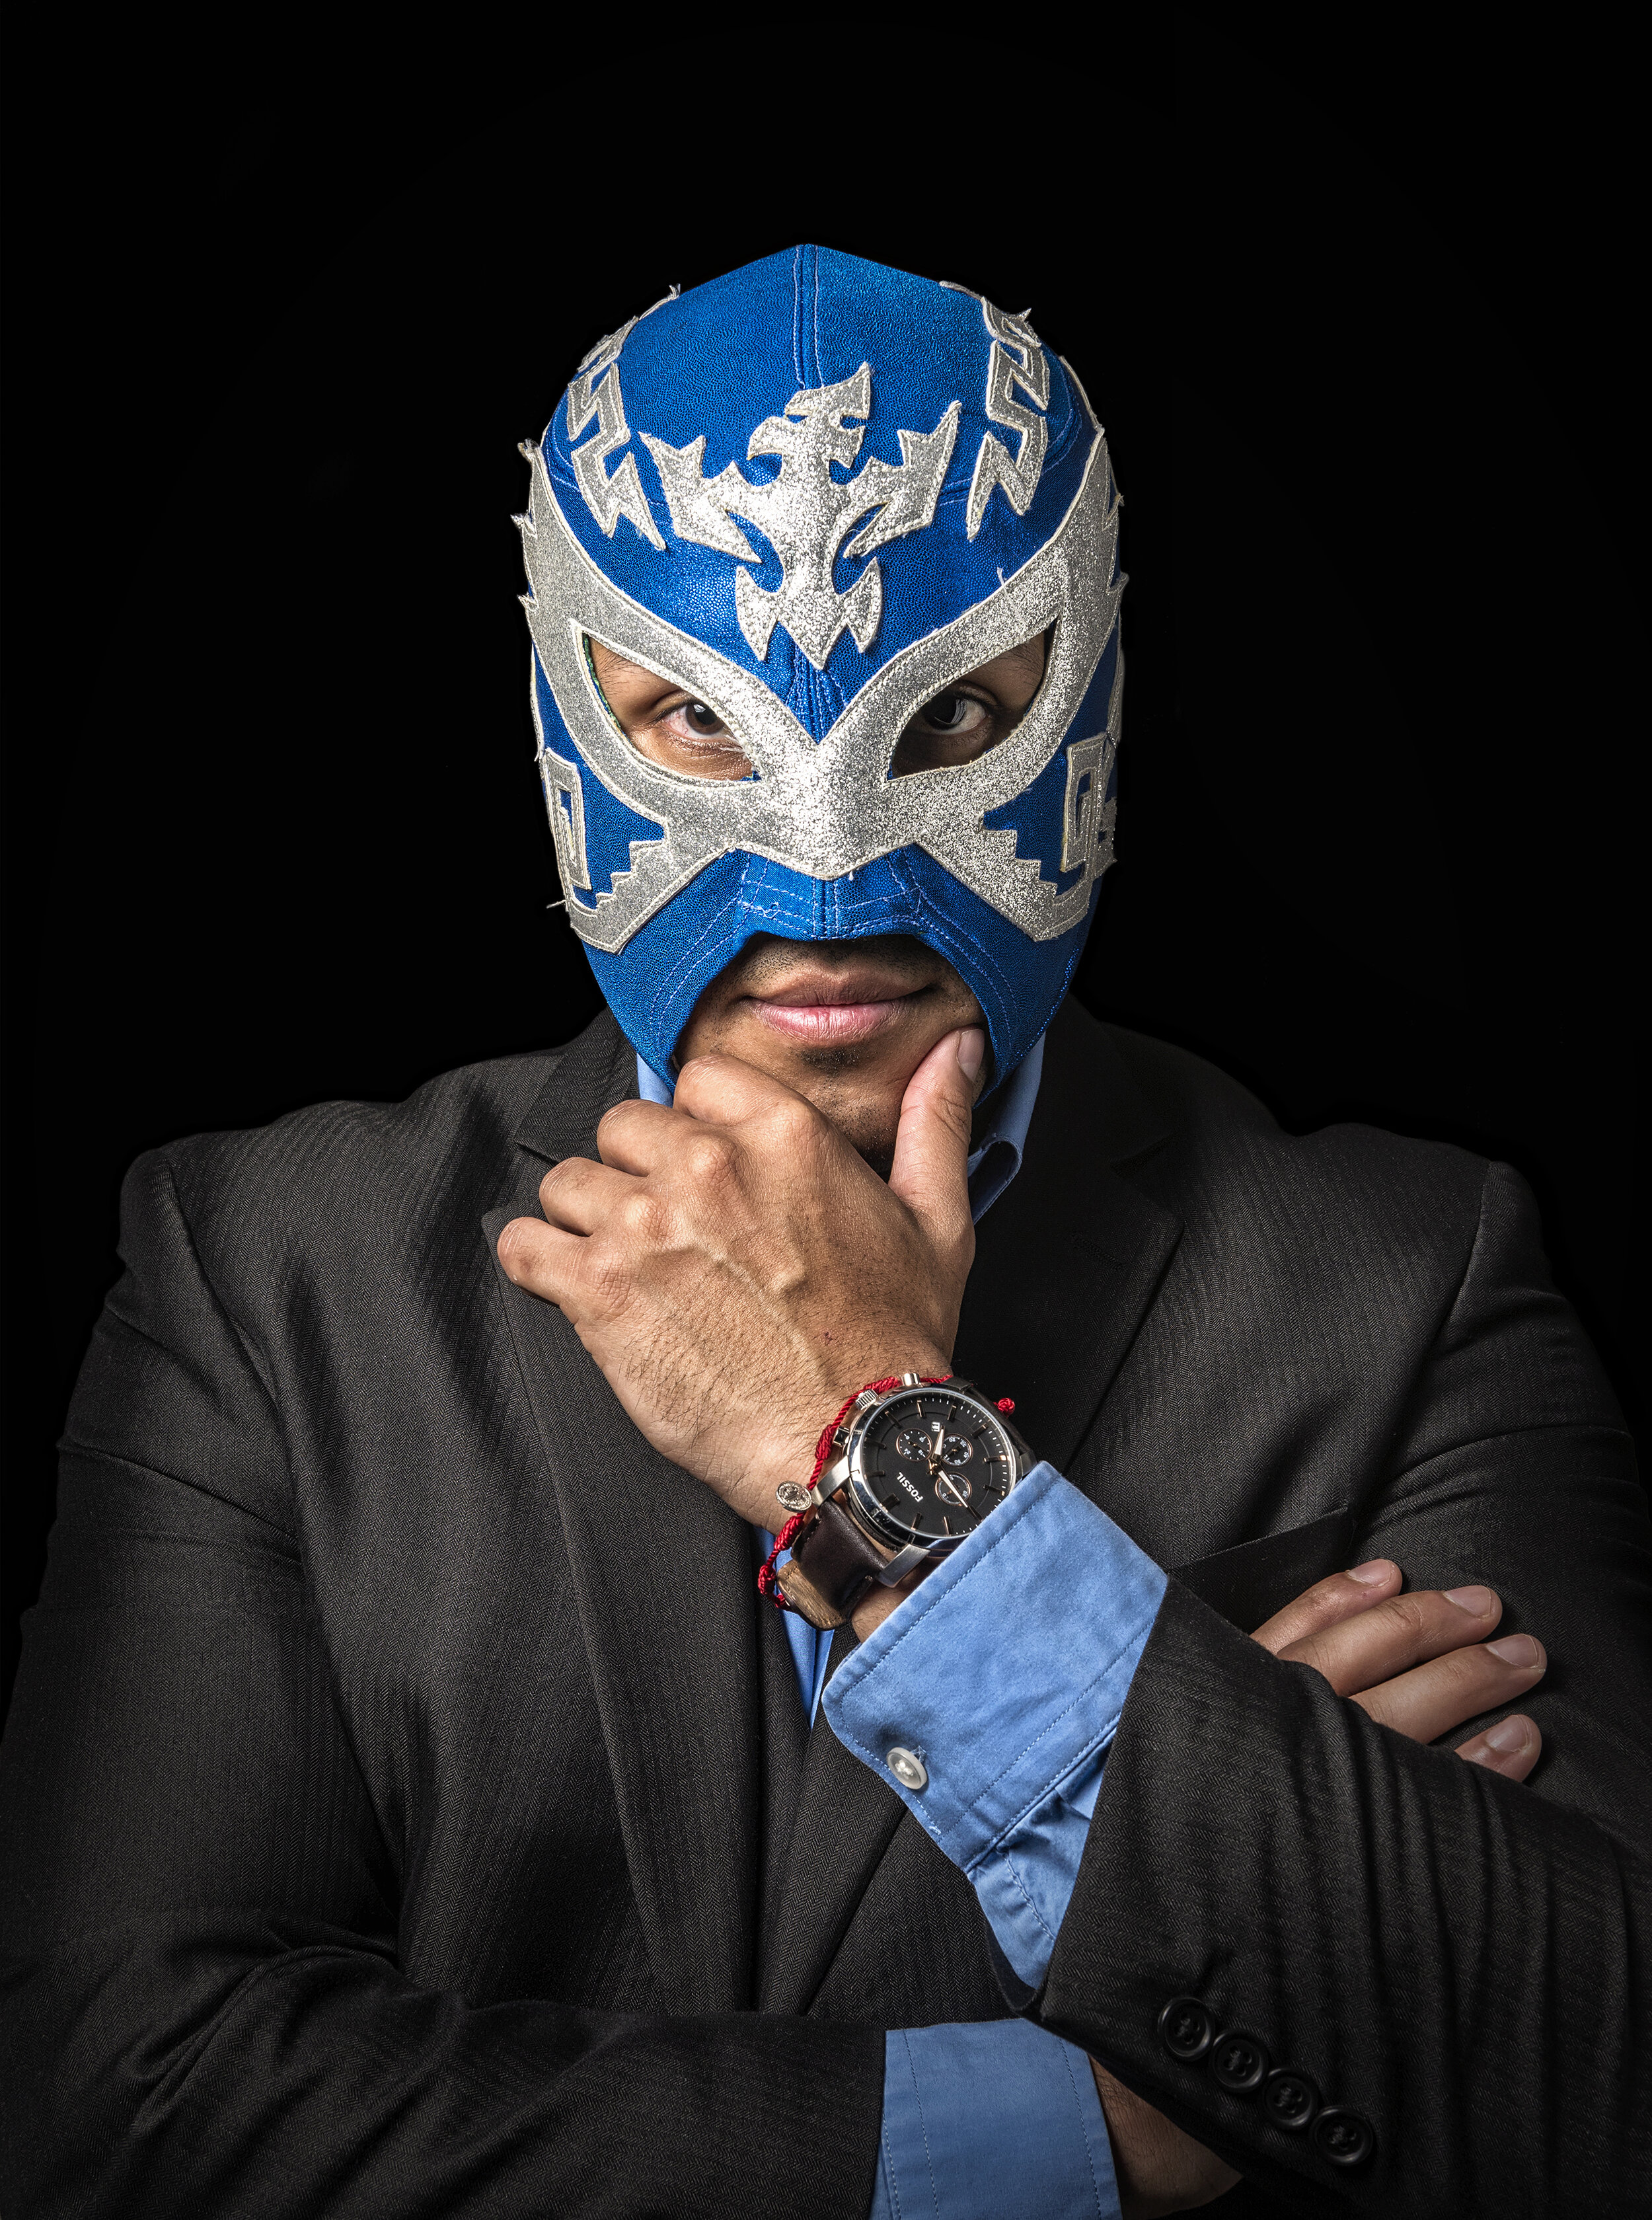  Lucha libre wrestler Aski Palomino poses for a portrait at his home in Dallas, TX.   Spectators notoriously booed and berated luchadores for their thematic roles. Palomino said, “We’re like a cheap psychologist.” 